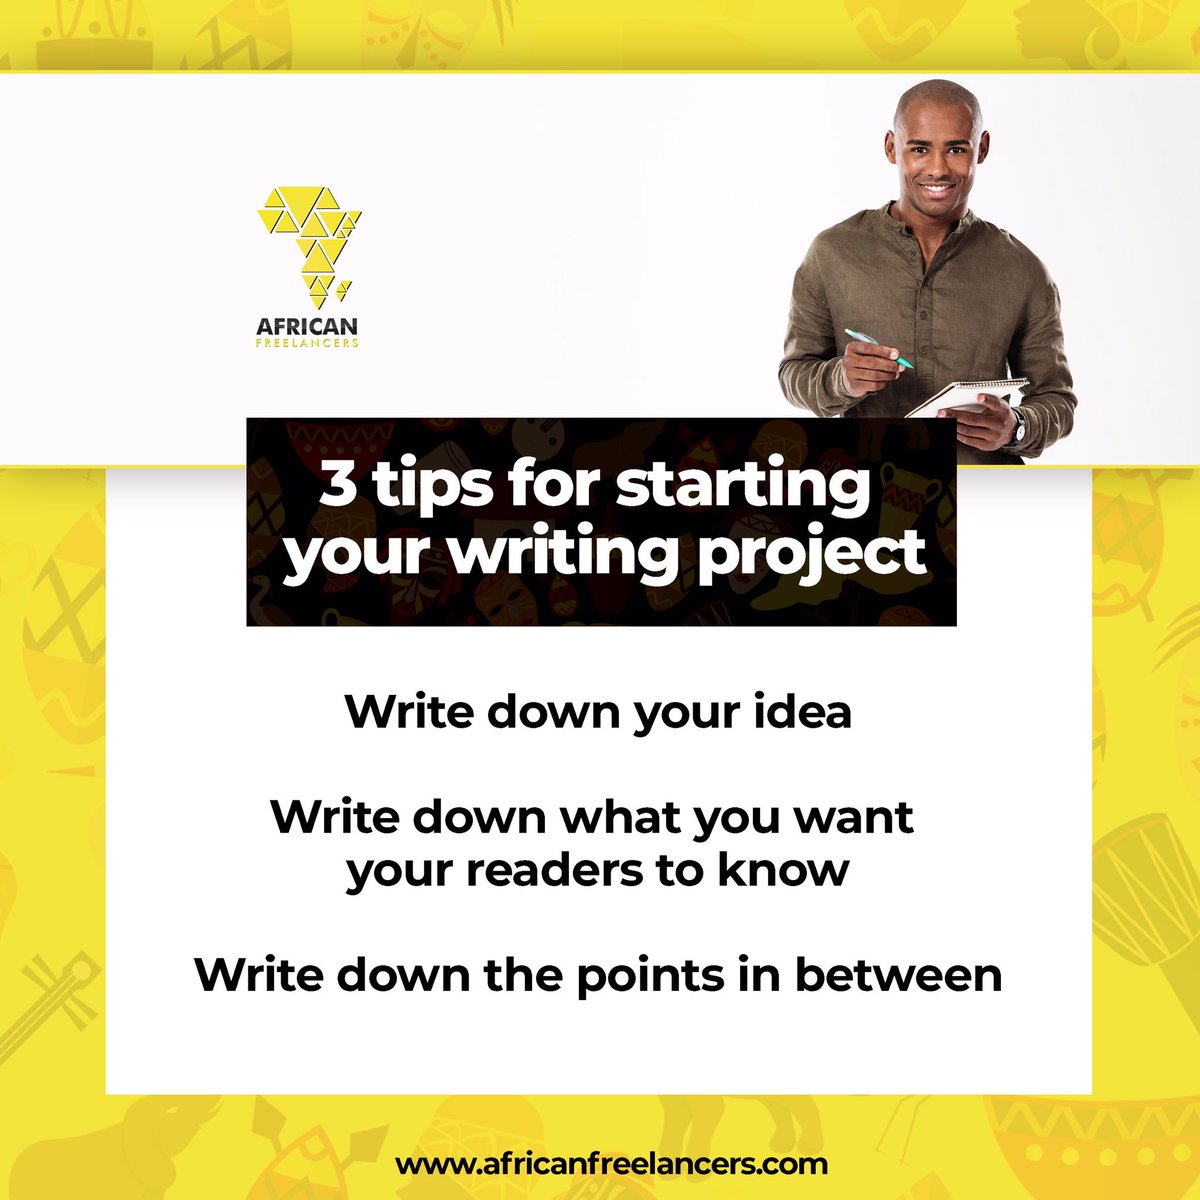 Need a headstart for your next writing project? Here are some tips for you. What other tips would you include?
.
Comments below 👇🏼👇🏼

#africanfreelancers #onlinejobsworkfromhome #onlinejobs #onlinejob #onlinesnigeria #onlineafrica #onlinework #onlineworks